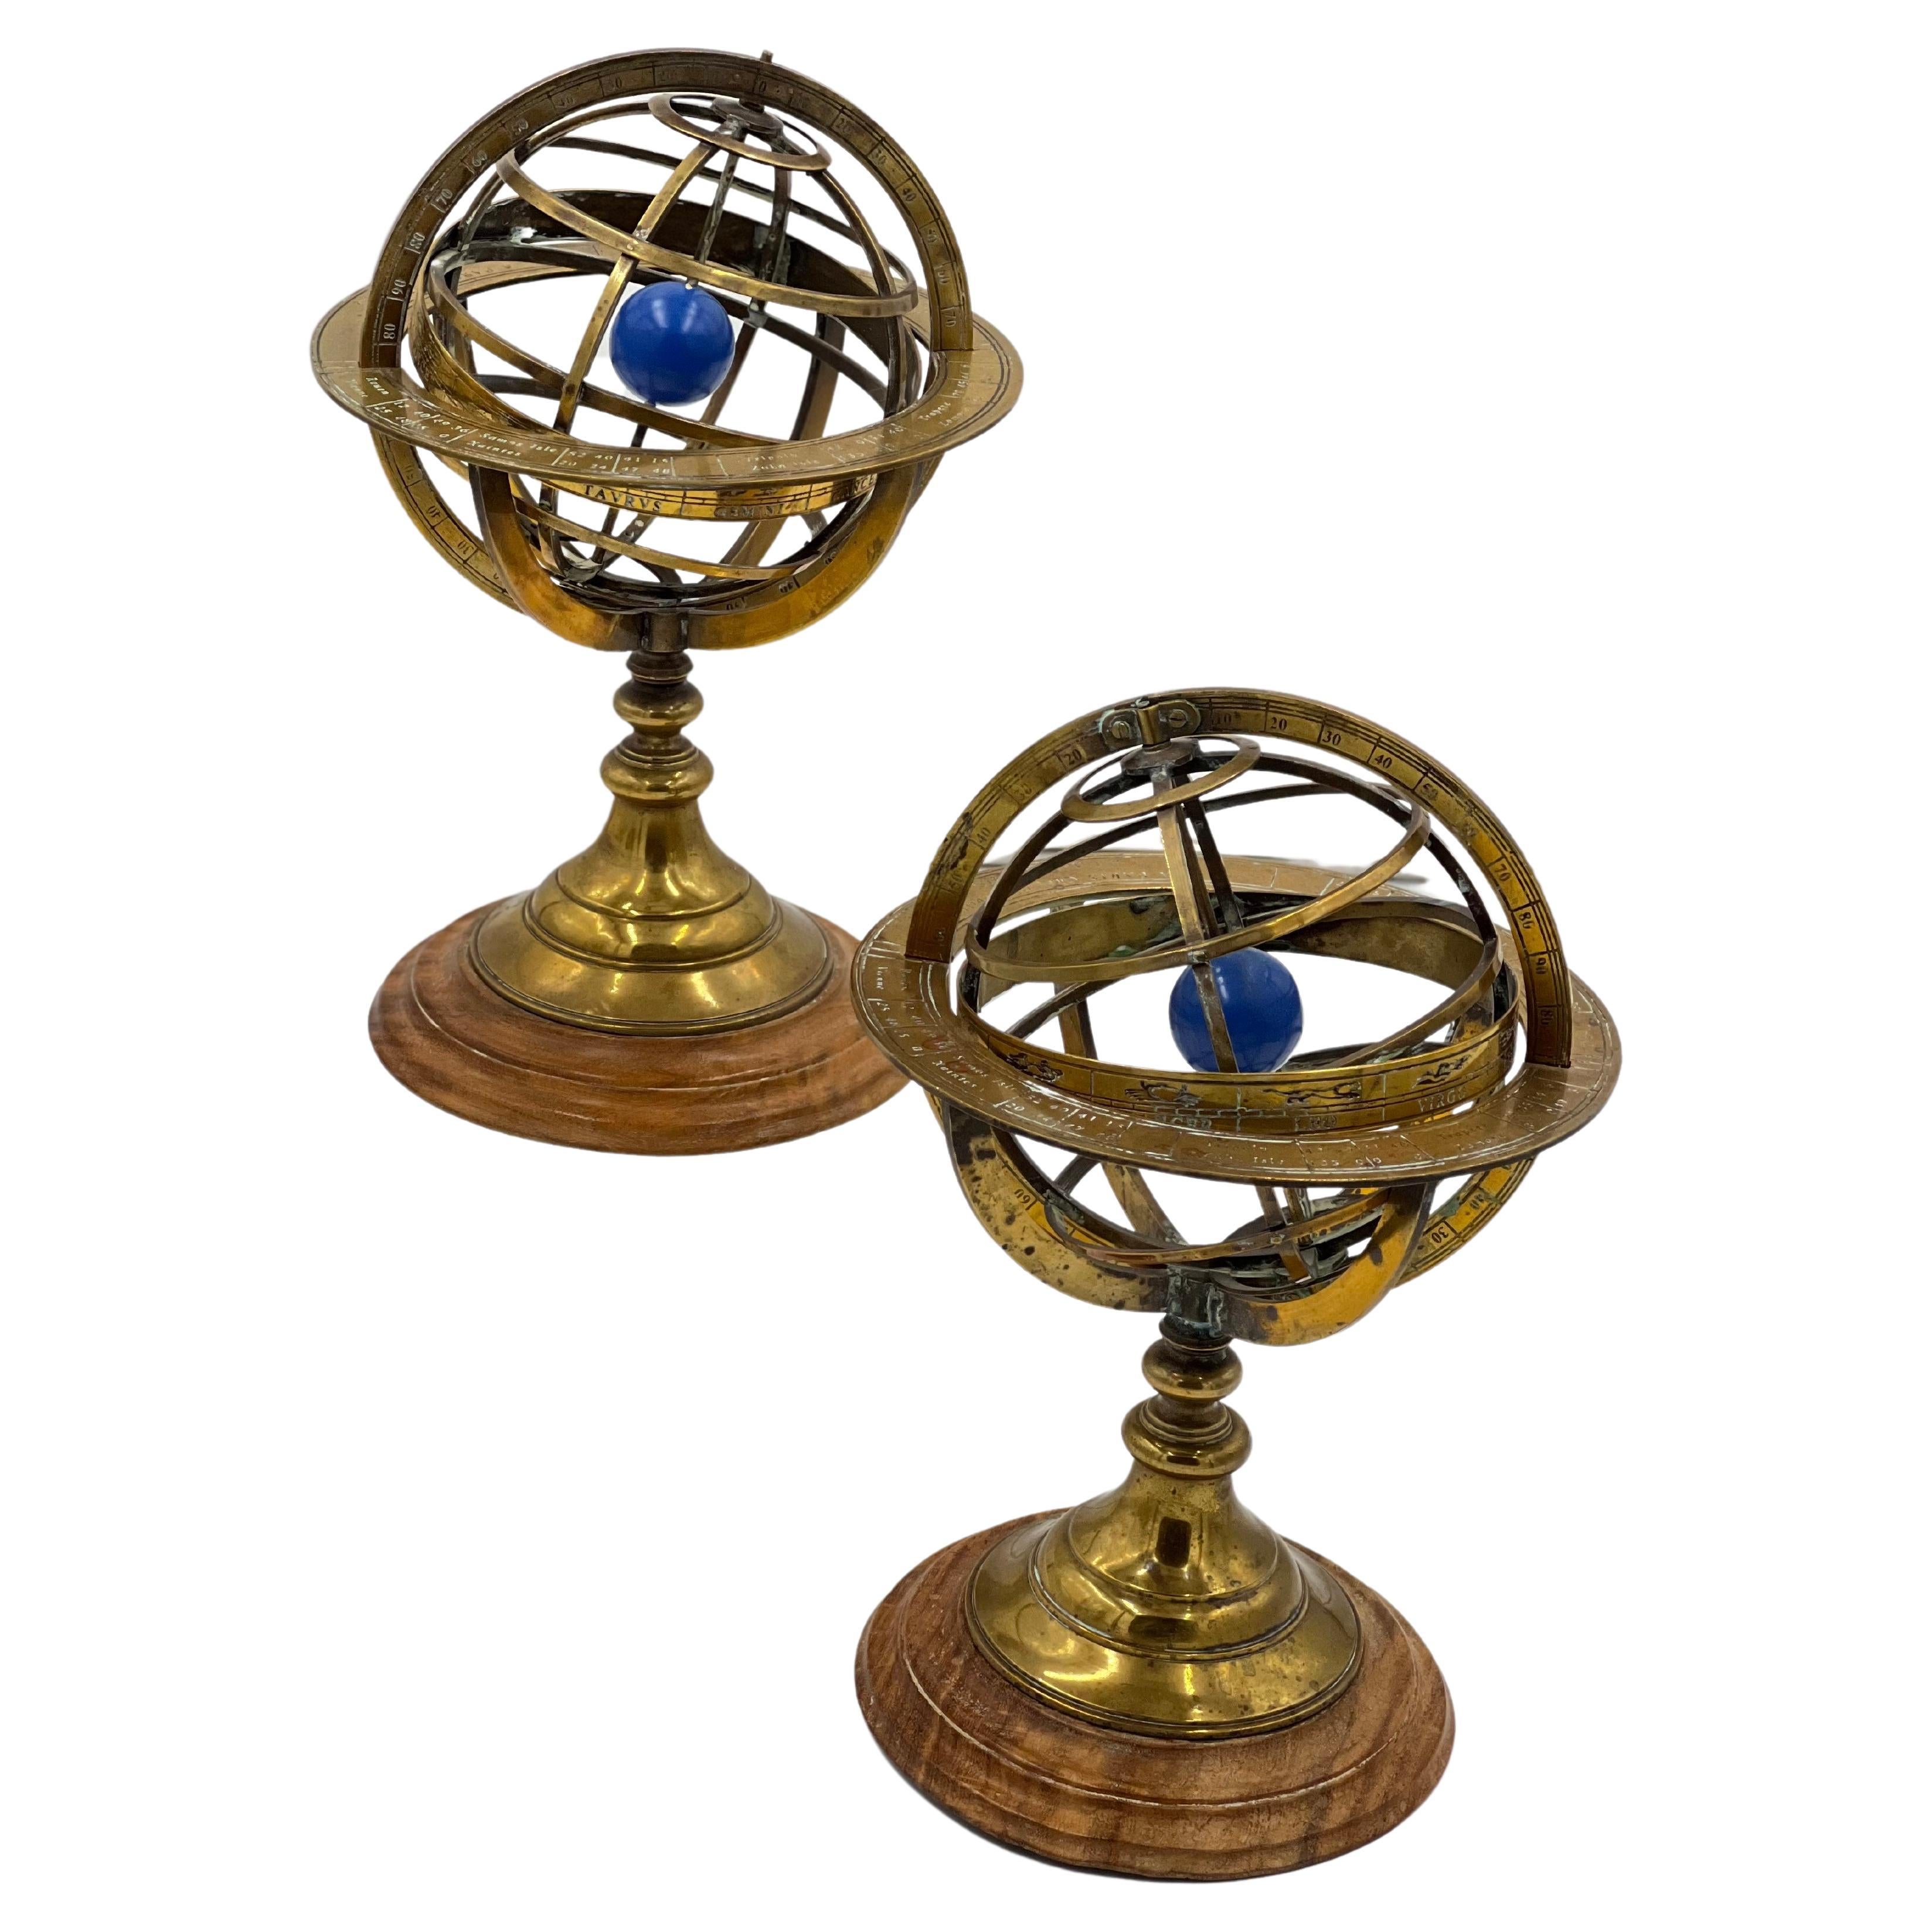 Pair of Antique 19th Century French Armillary Spheres